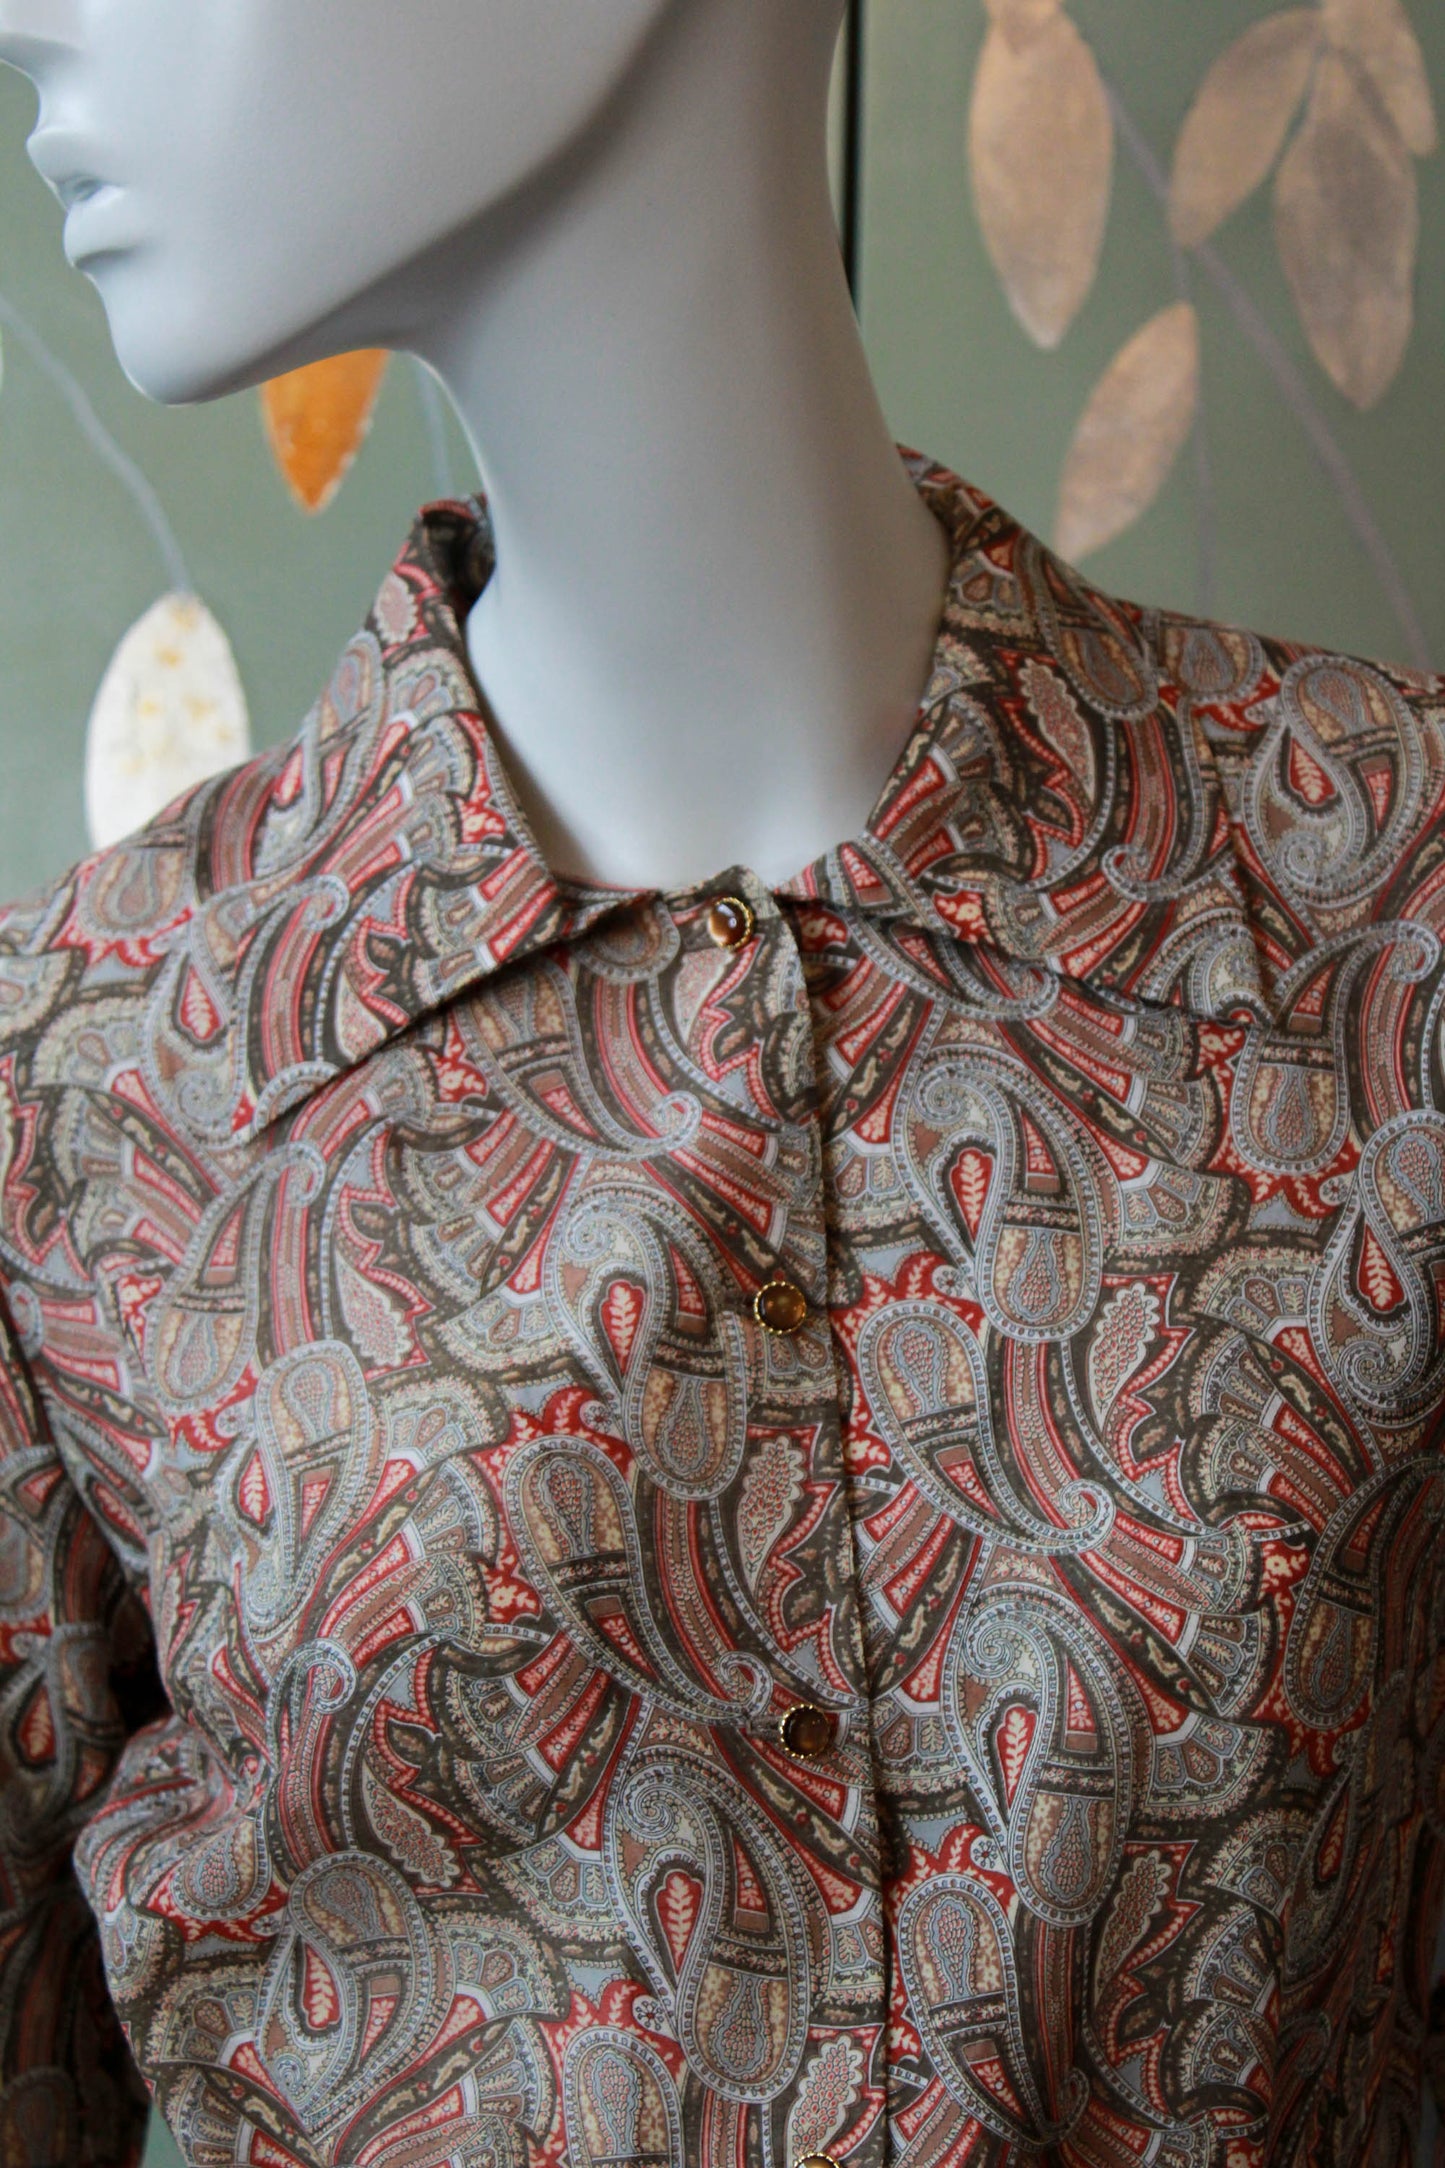 1970s style paisley print cotton blouse with spread collar, green and red paisley print